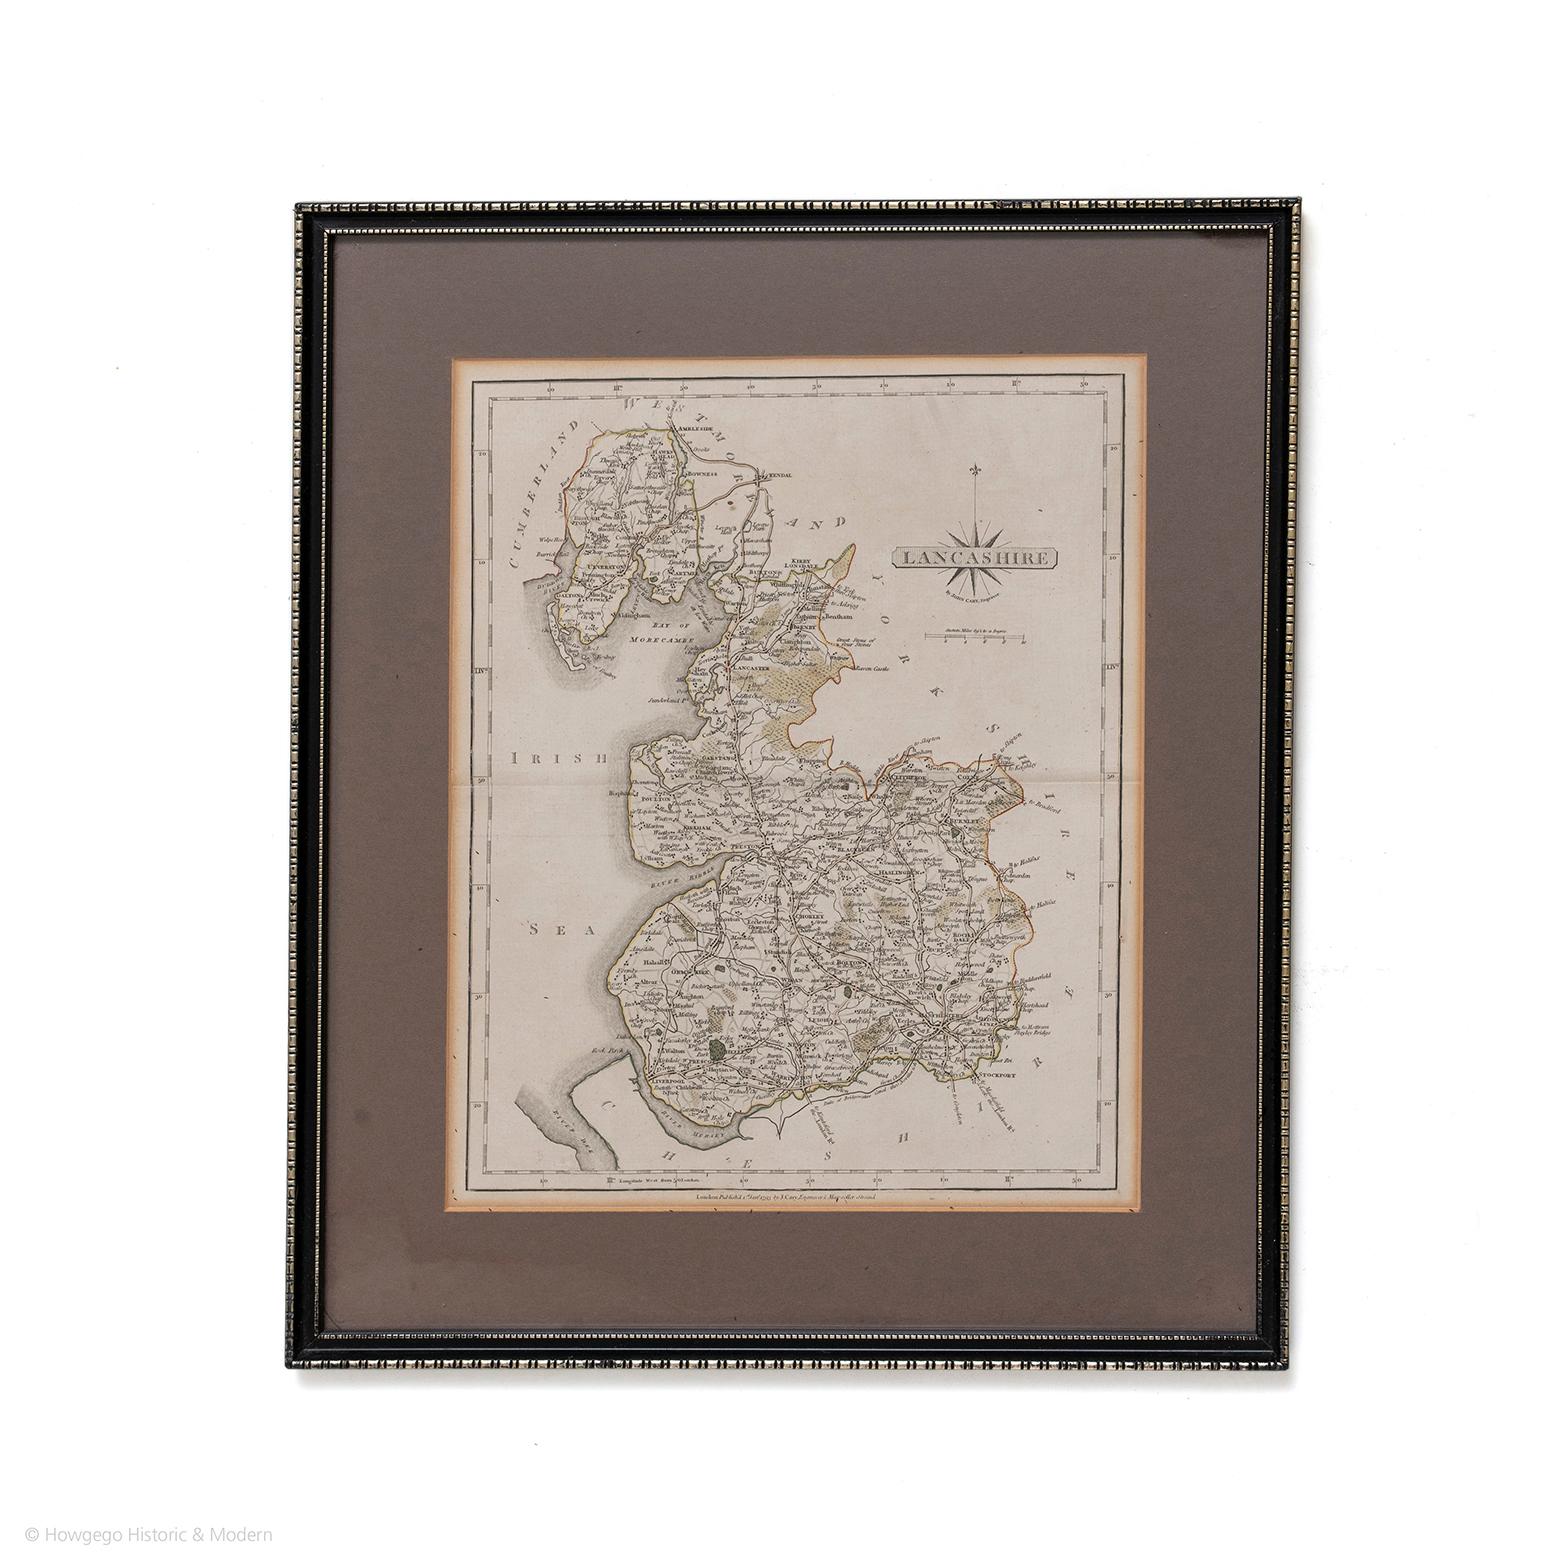 Map of Lancashire by John Cary engraver
published 1st Jan 1793 by J Cary Engraver & Mapseller Strand
in original black and gold classic map frame